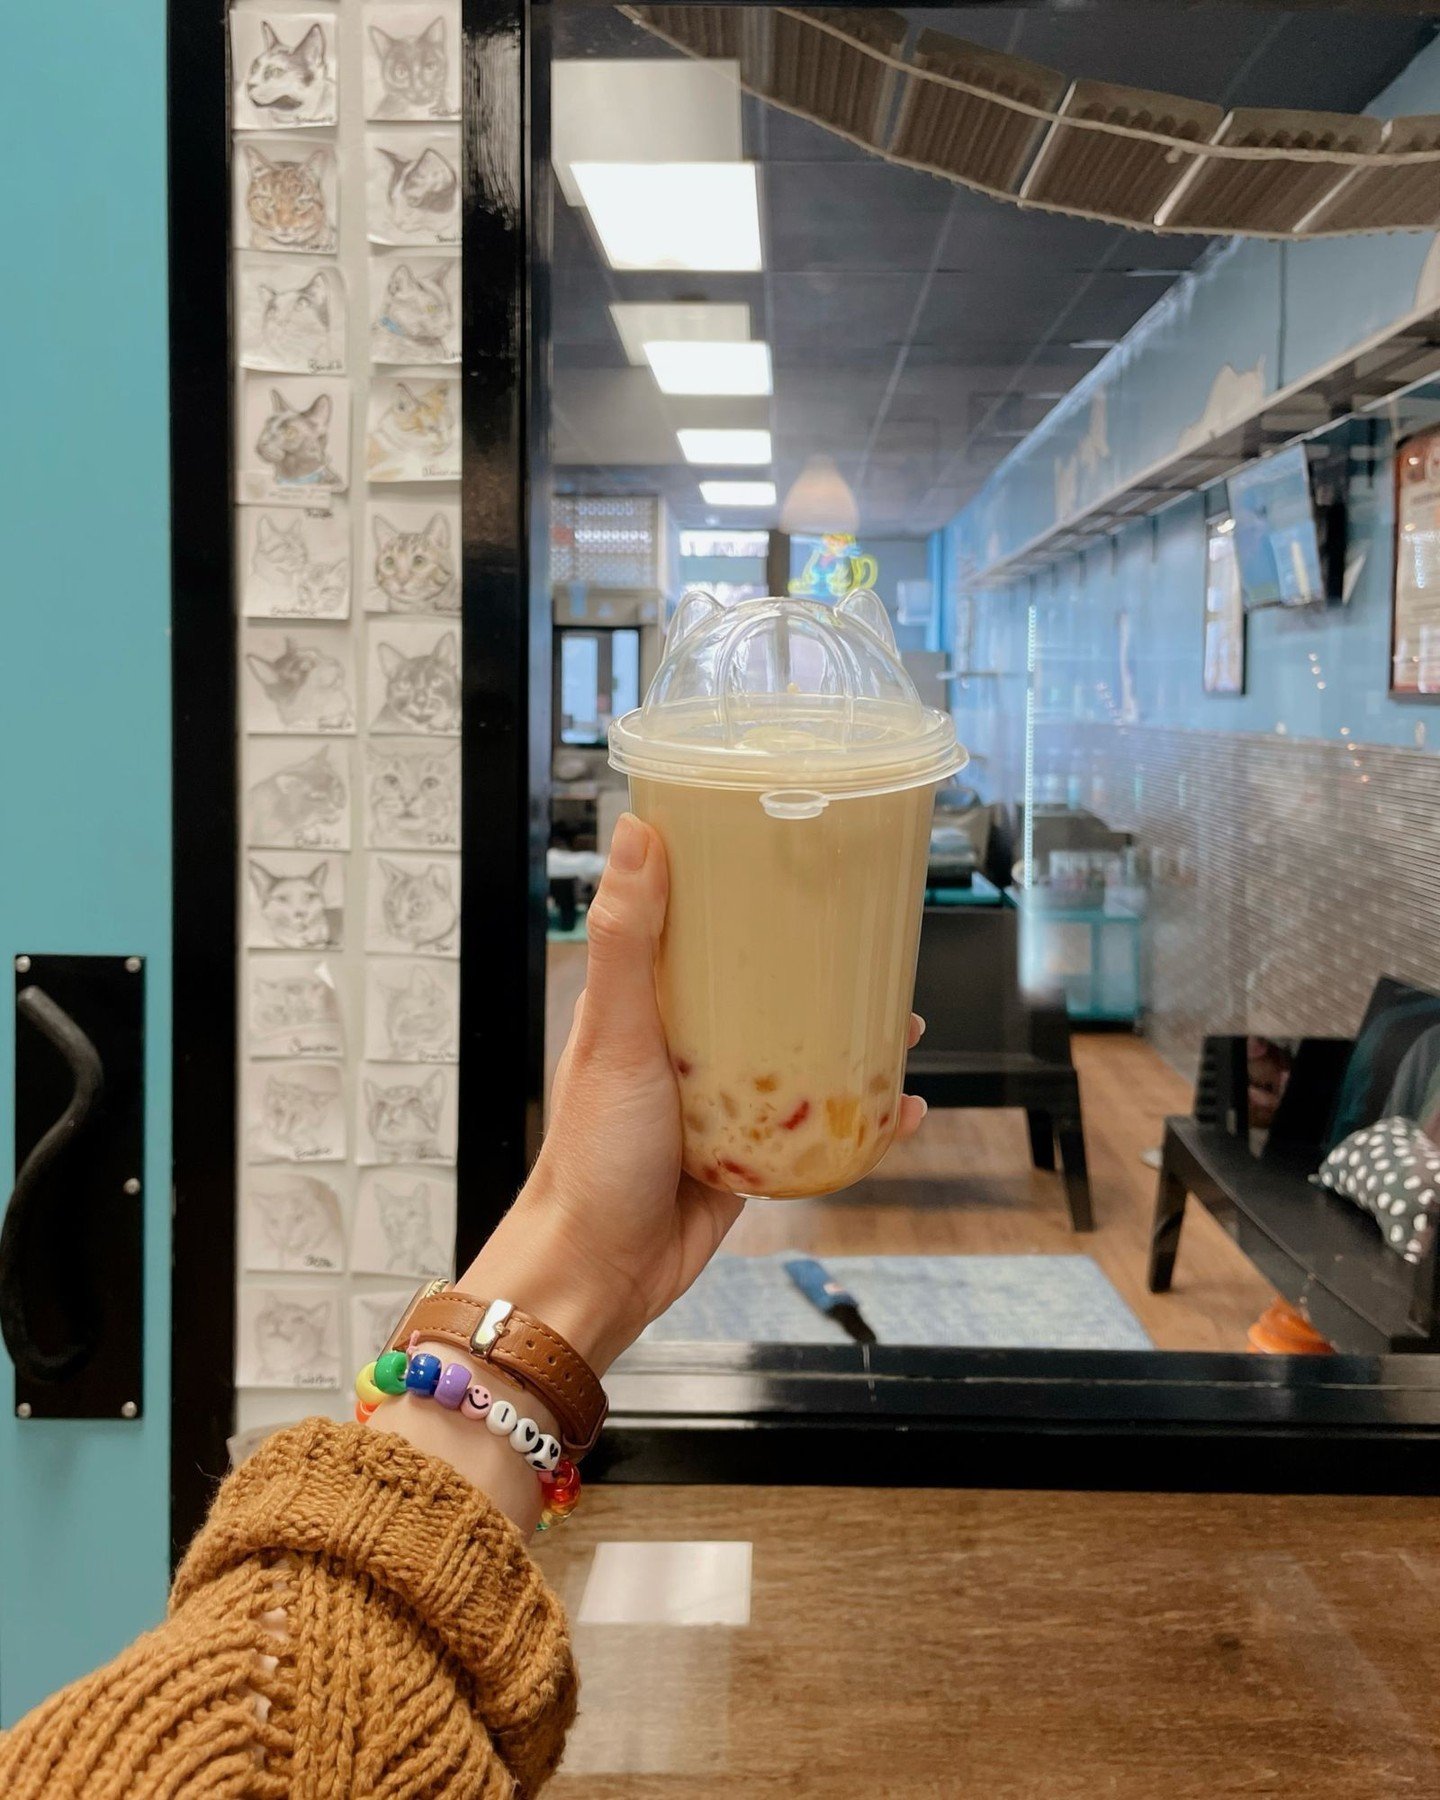 Have you heard? Our boba milk teas are now being served in these *adorable* kitty ears cups. 🐱🧋😻

We still have some sessions available to book for both locations (WS &amp; GSO) this Friday, Saturday, &amp; Sunday, but snag your reservation while 